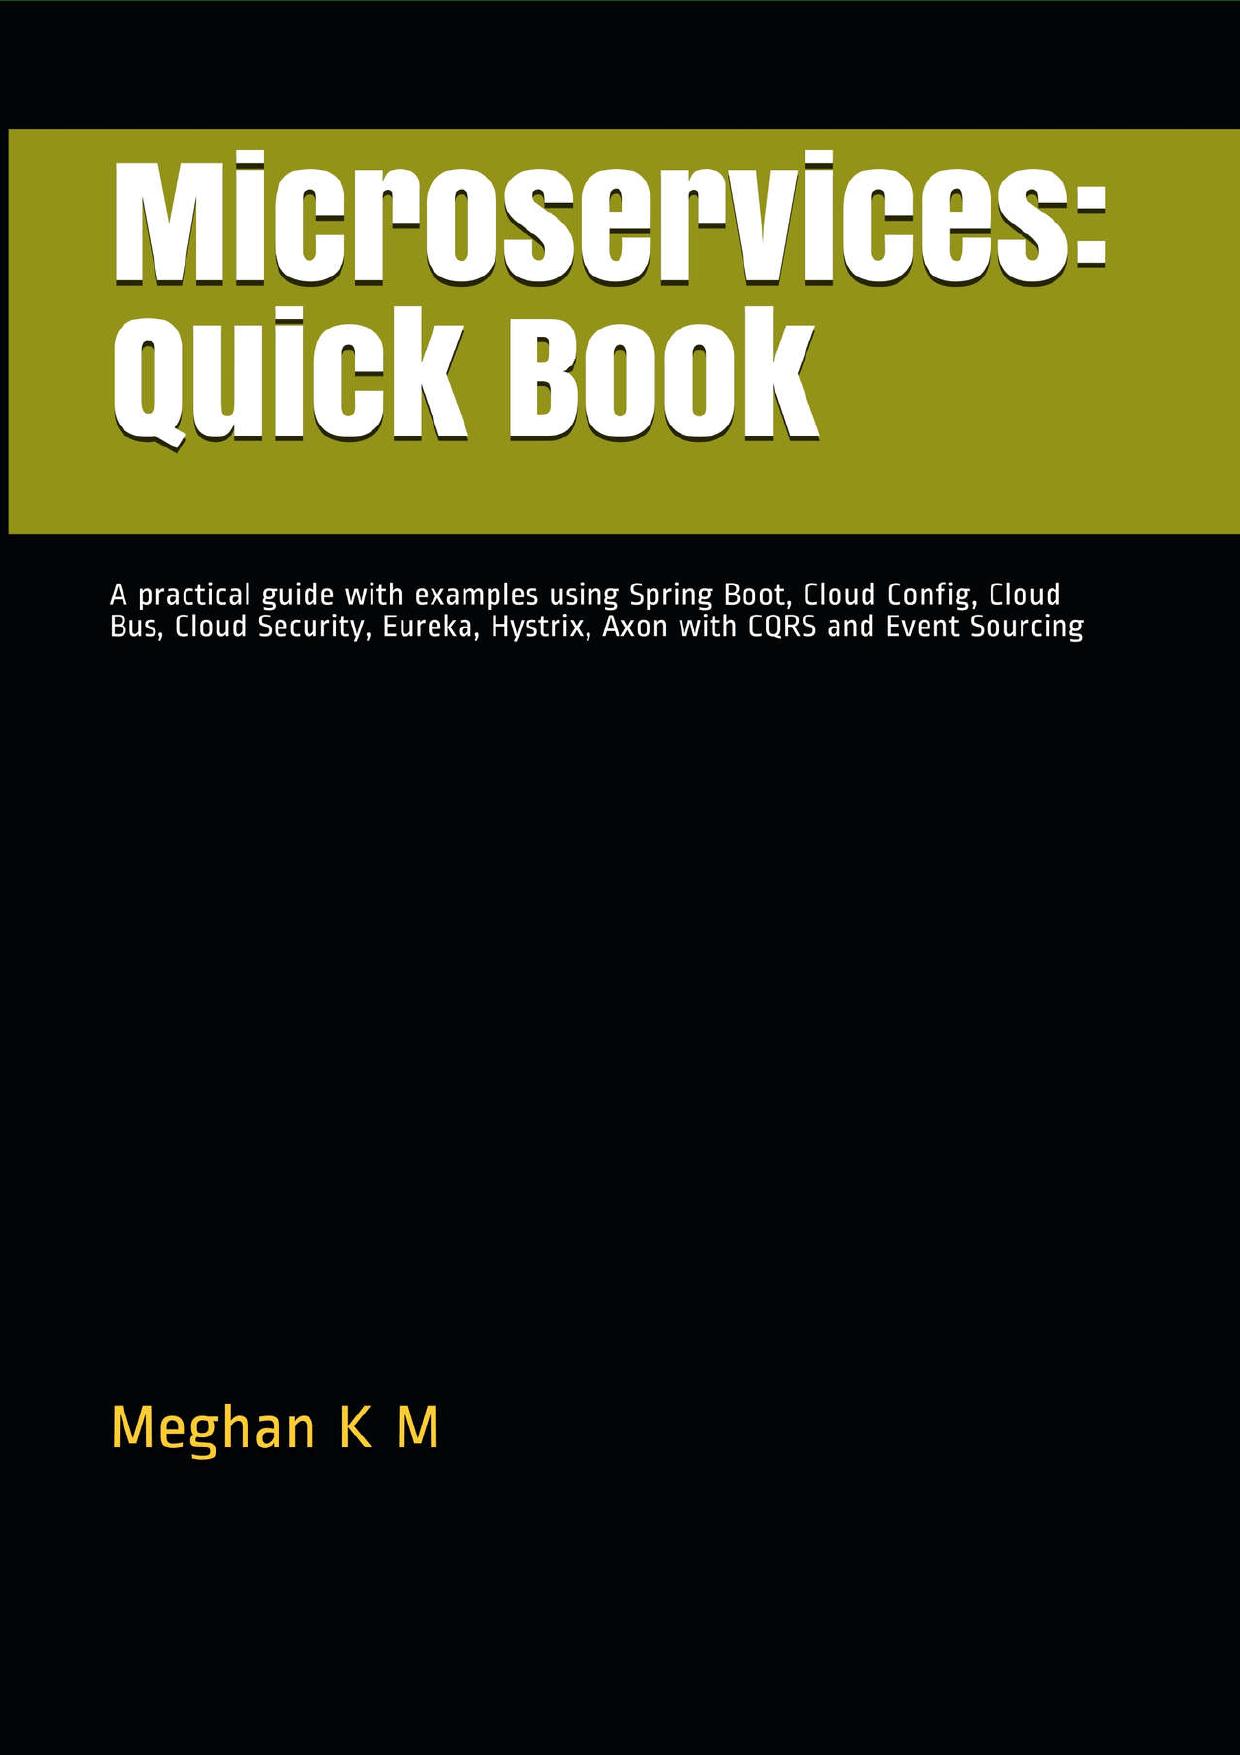 Microservices: Quick Book: A practical guide with examples using Spring Boot, Cloud Config, Cloud Bus, Cloud Security, Eureka, Hystrix, Axon with CQRS and Event Sourcing